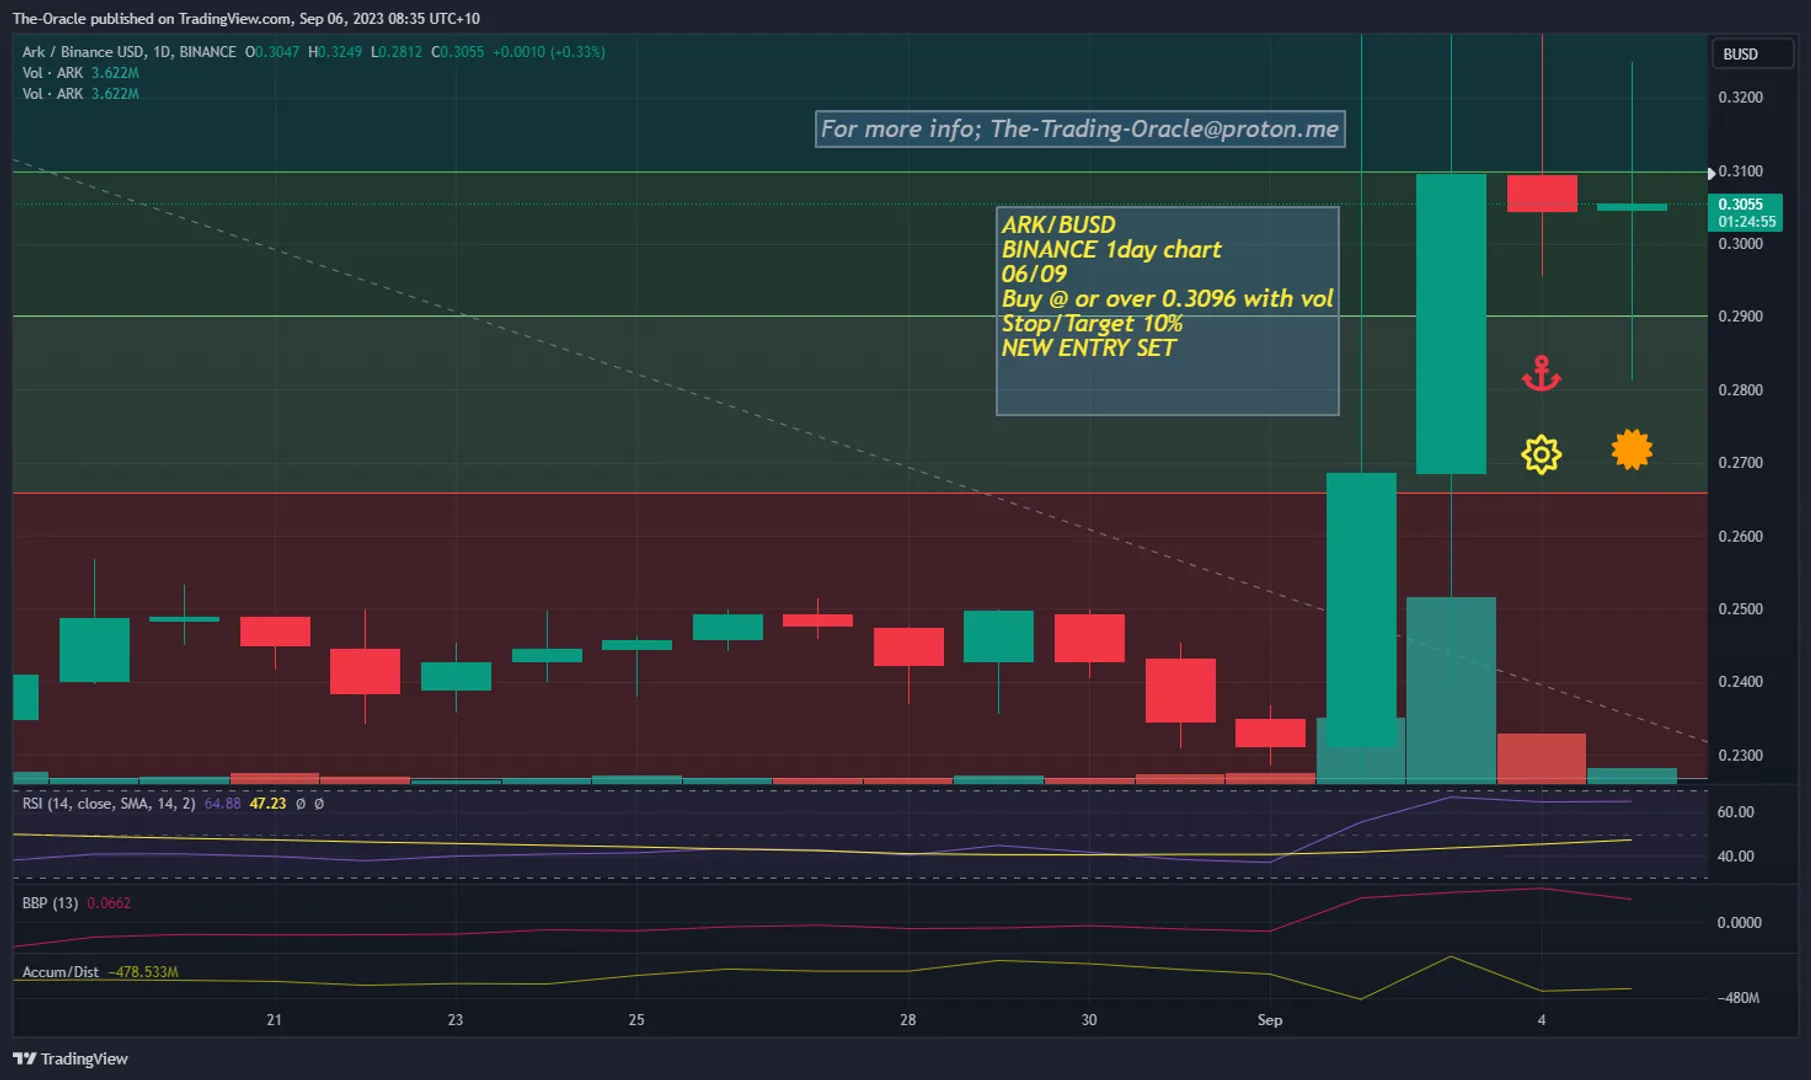 WATCHLIST UPDATE
ARK/BUSD
BINANCE 1day chart
06/09
Buy @ or over 0.3096 with vol
Stop/Target 10%
NEW ENTRY SET

#ARK